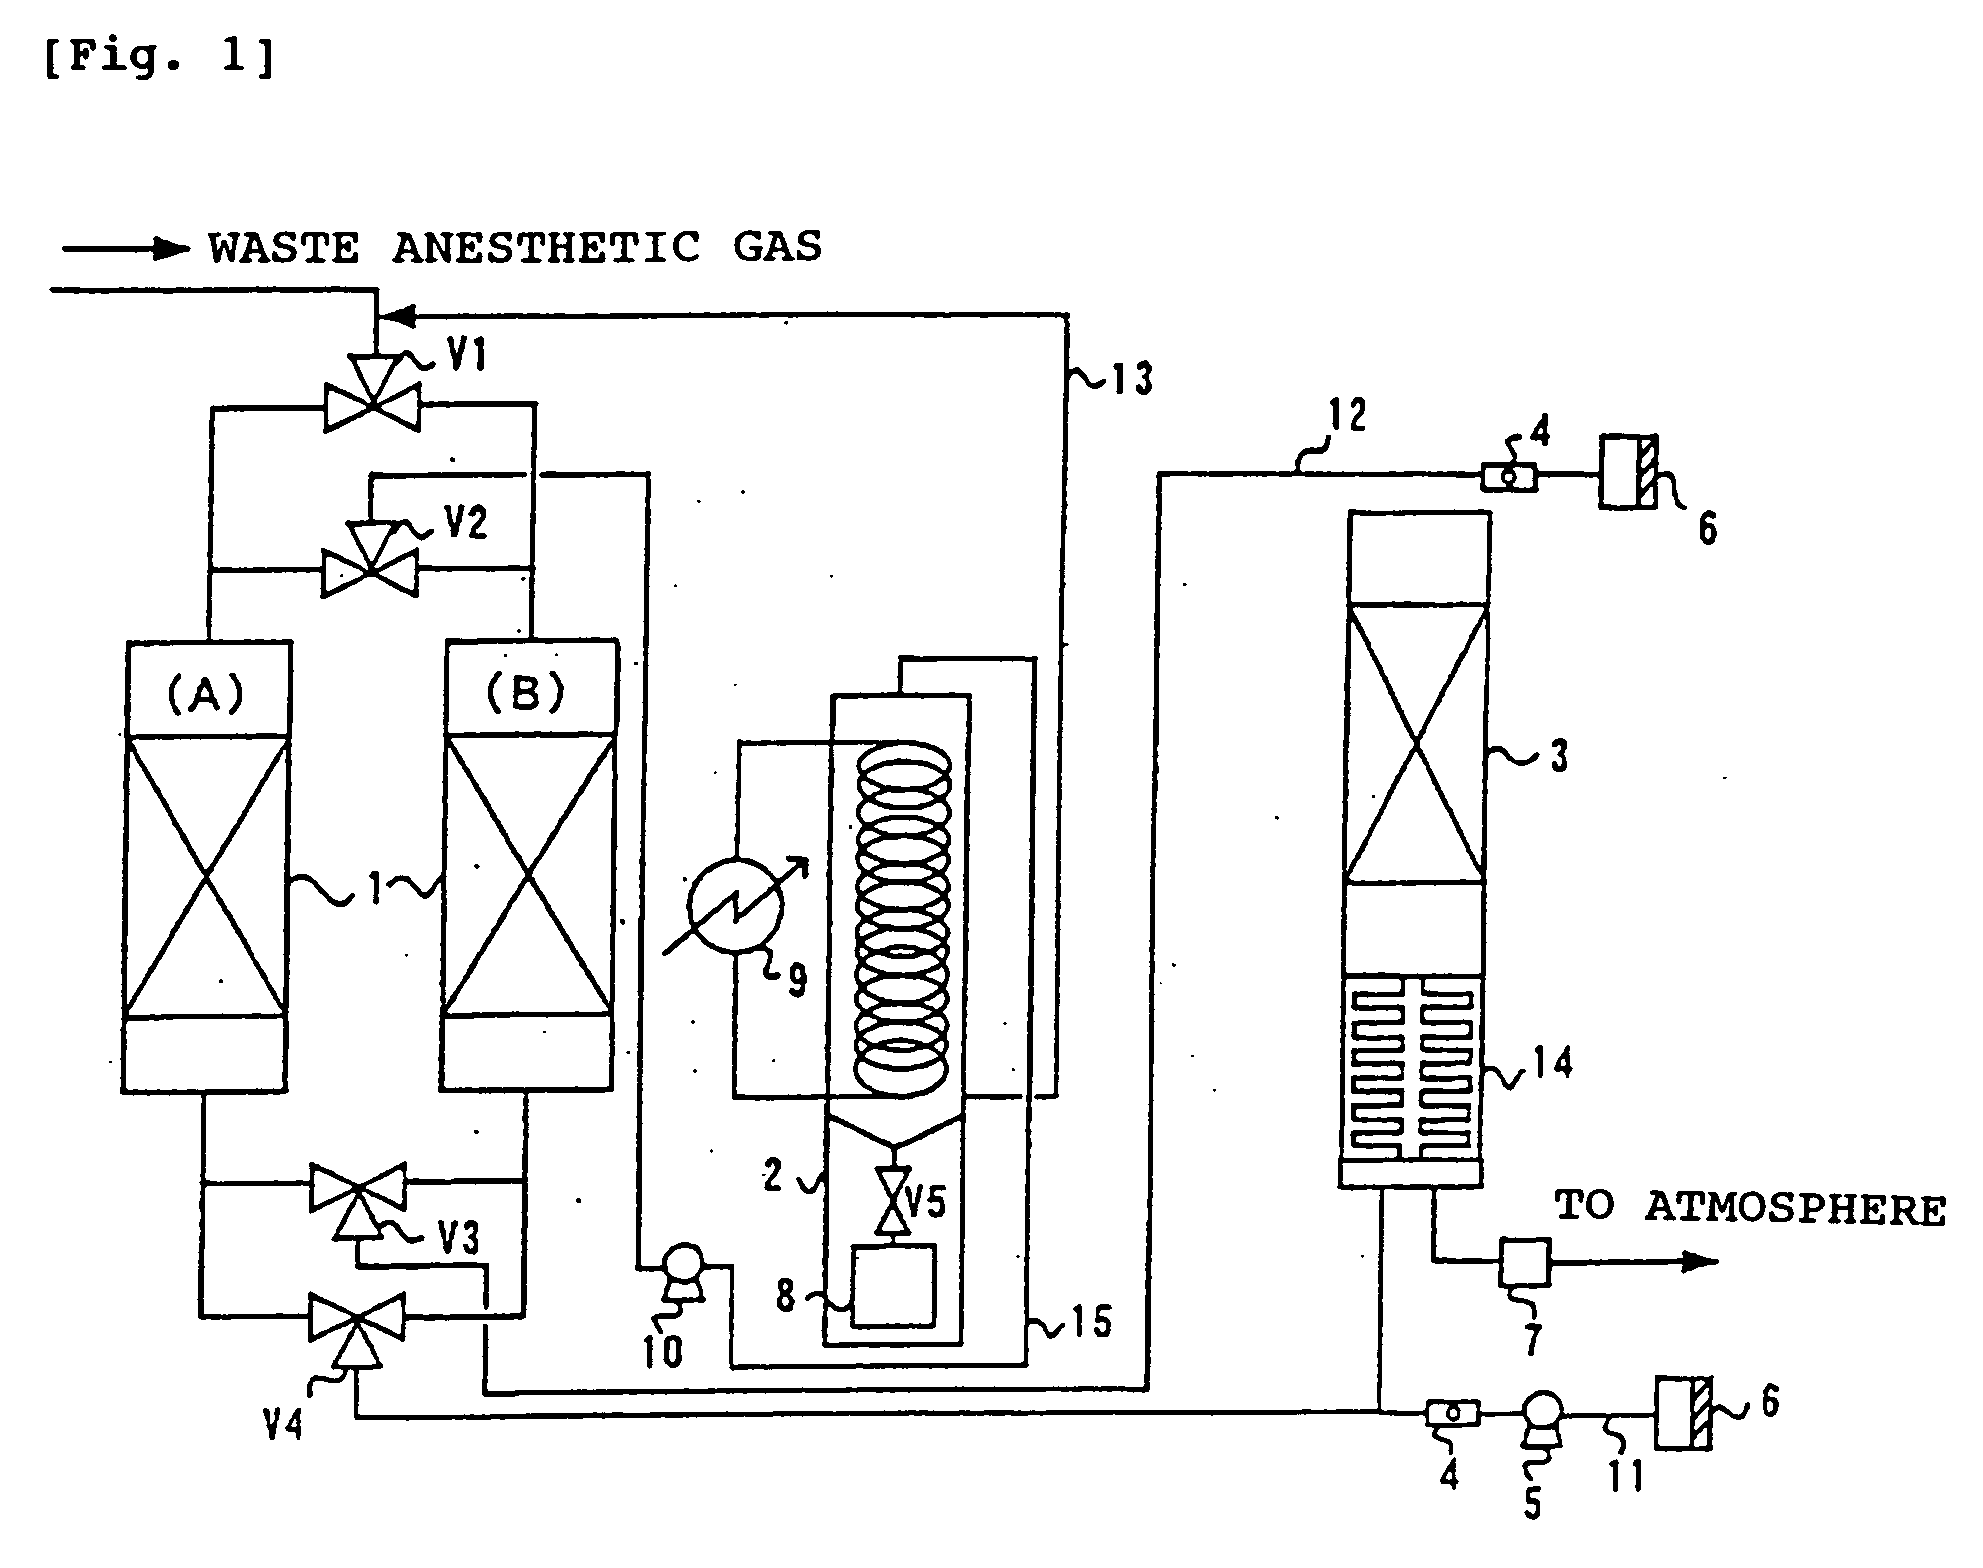 Process and apparatus for treating waste anesthetic gas